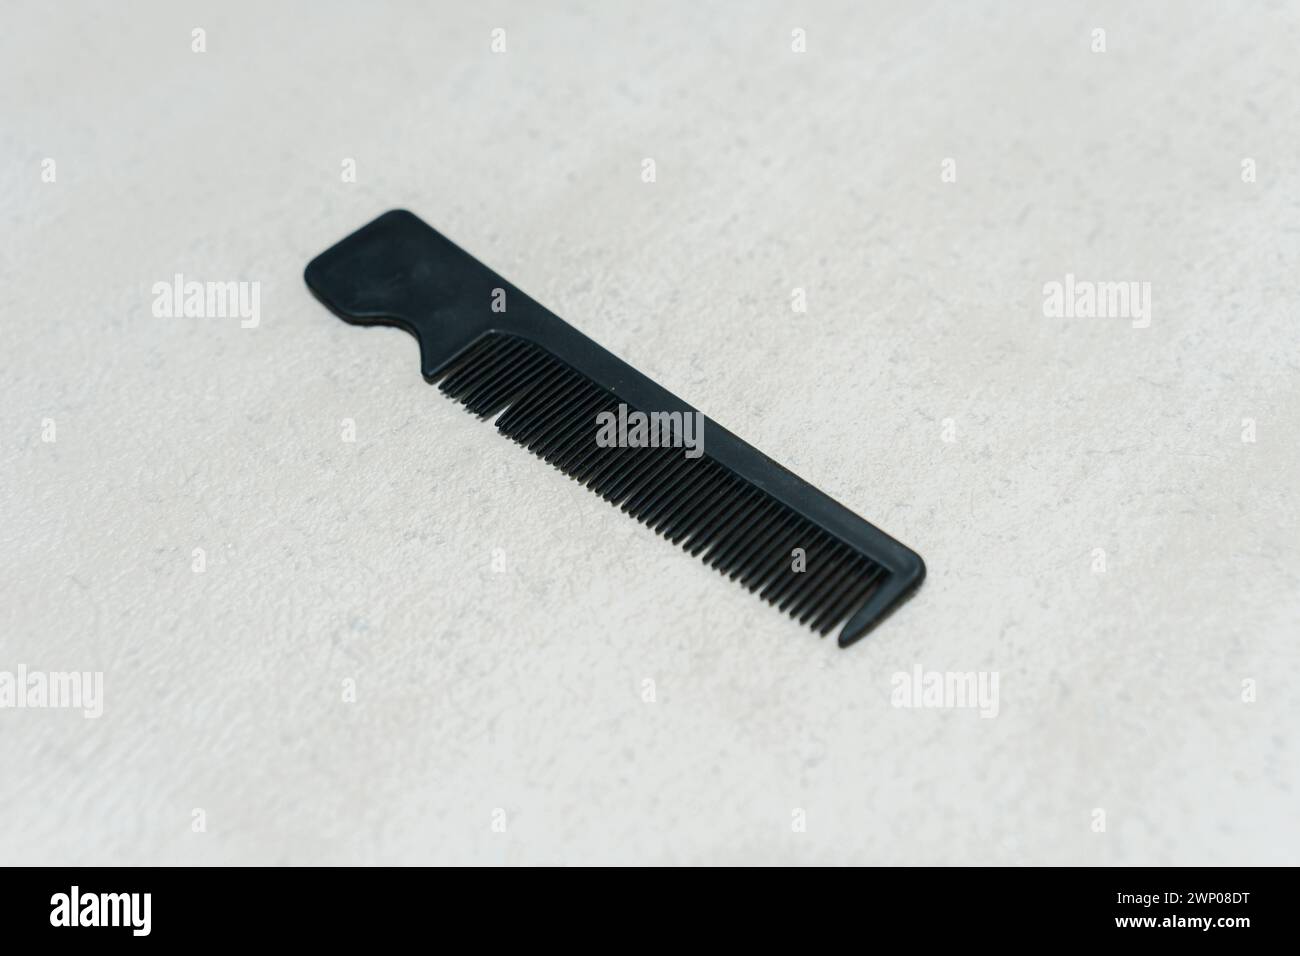 Simple small black plastic comb isolated on white background. Stock Photo